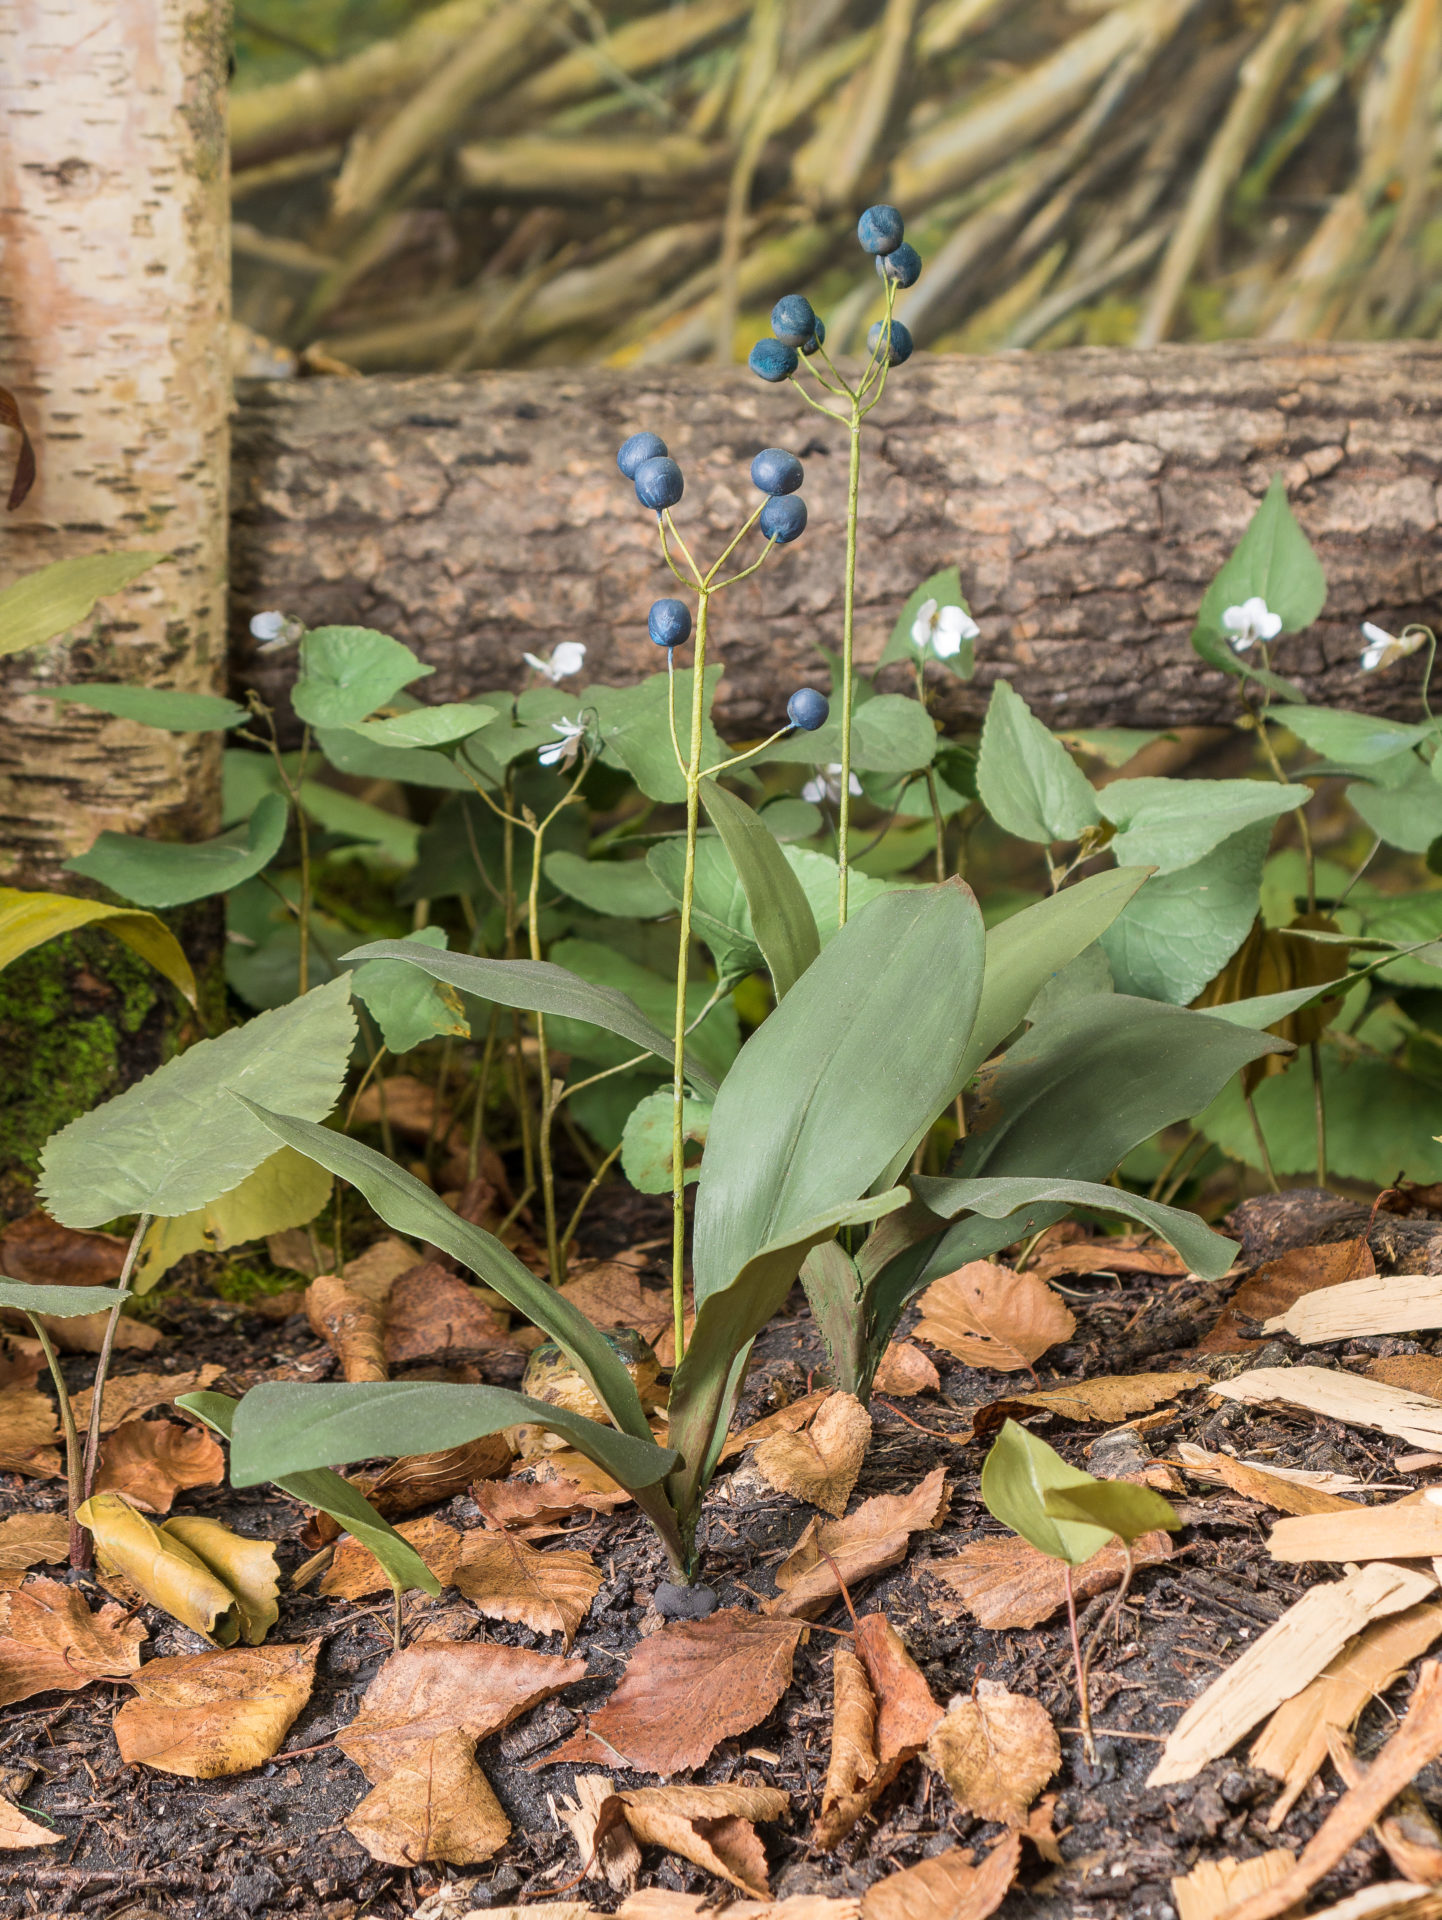 bluebead lily and white violet in the diorama